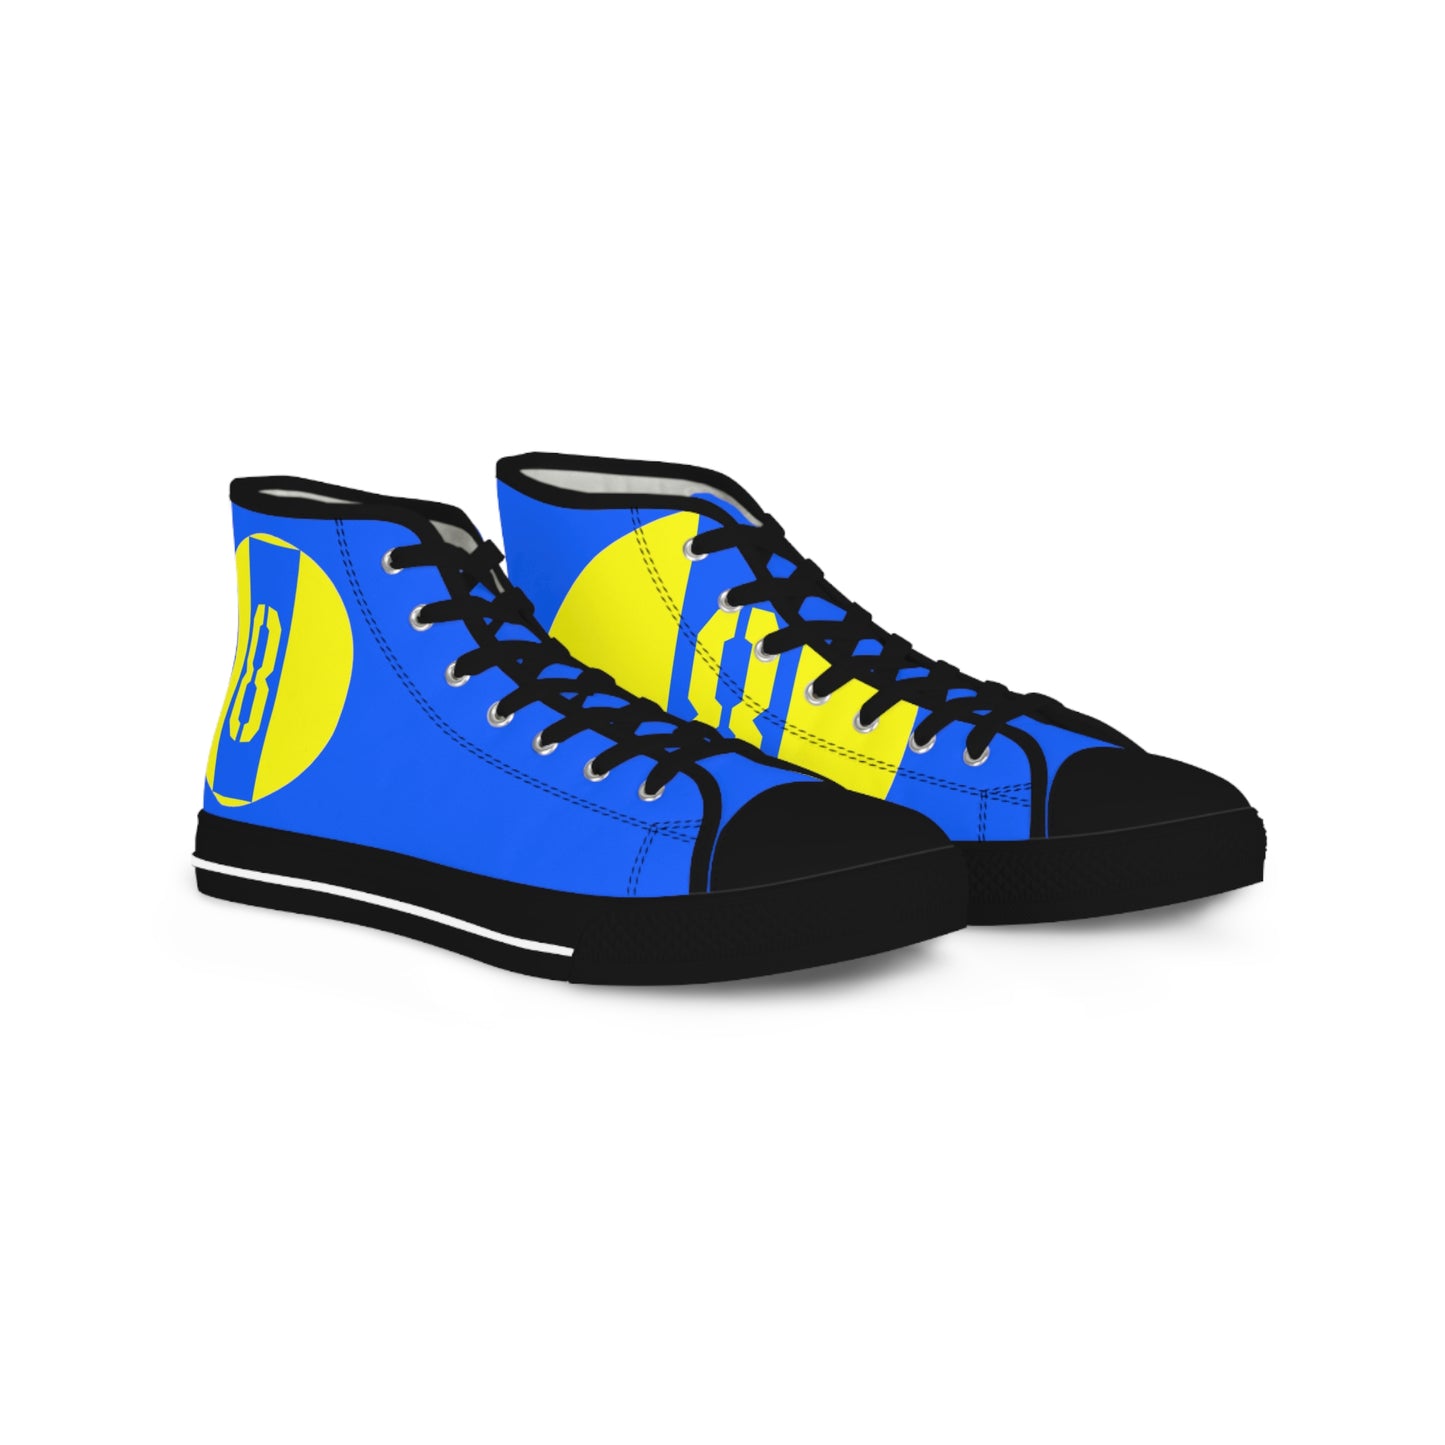 Limited Edition High Top Sneakers - 8 - Blue